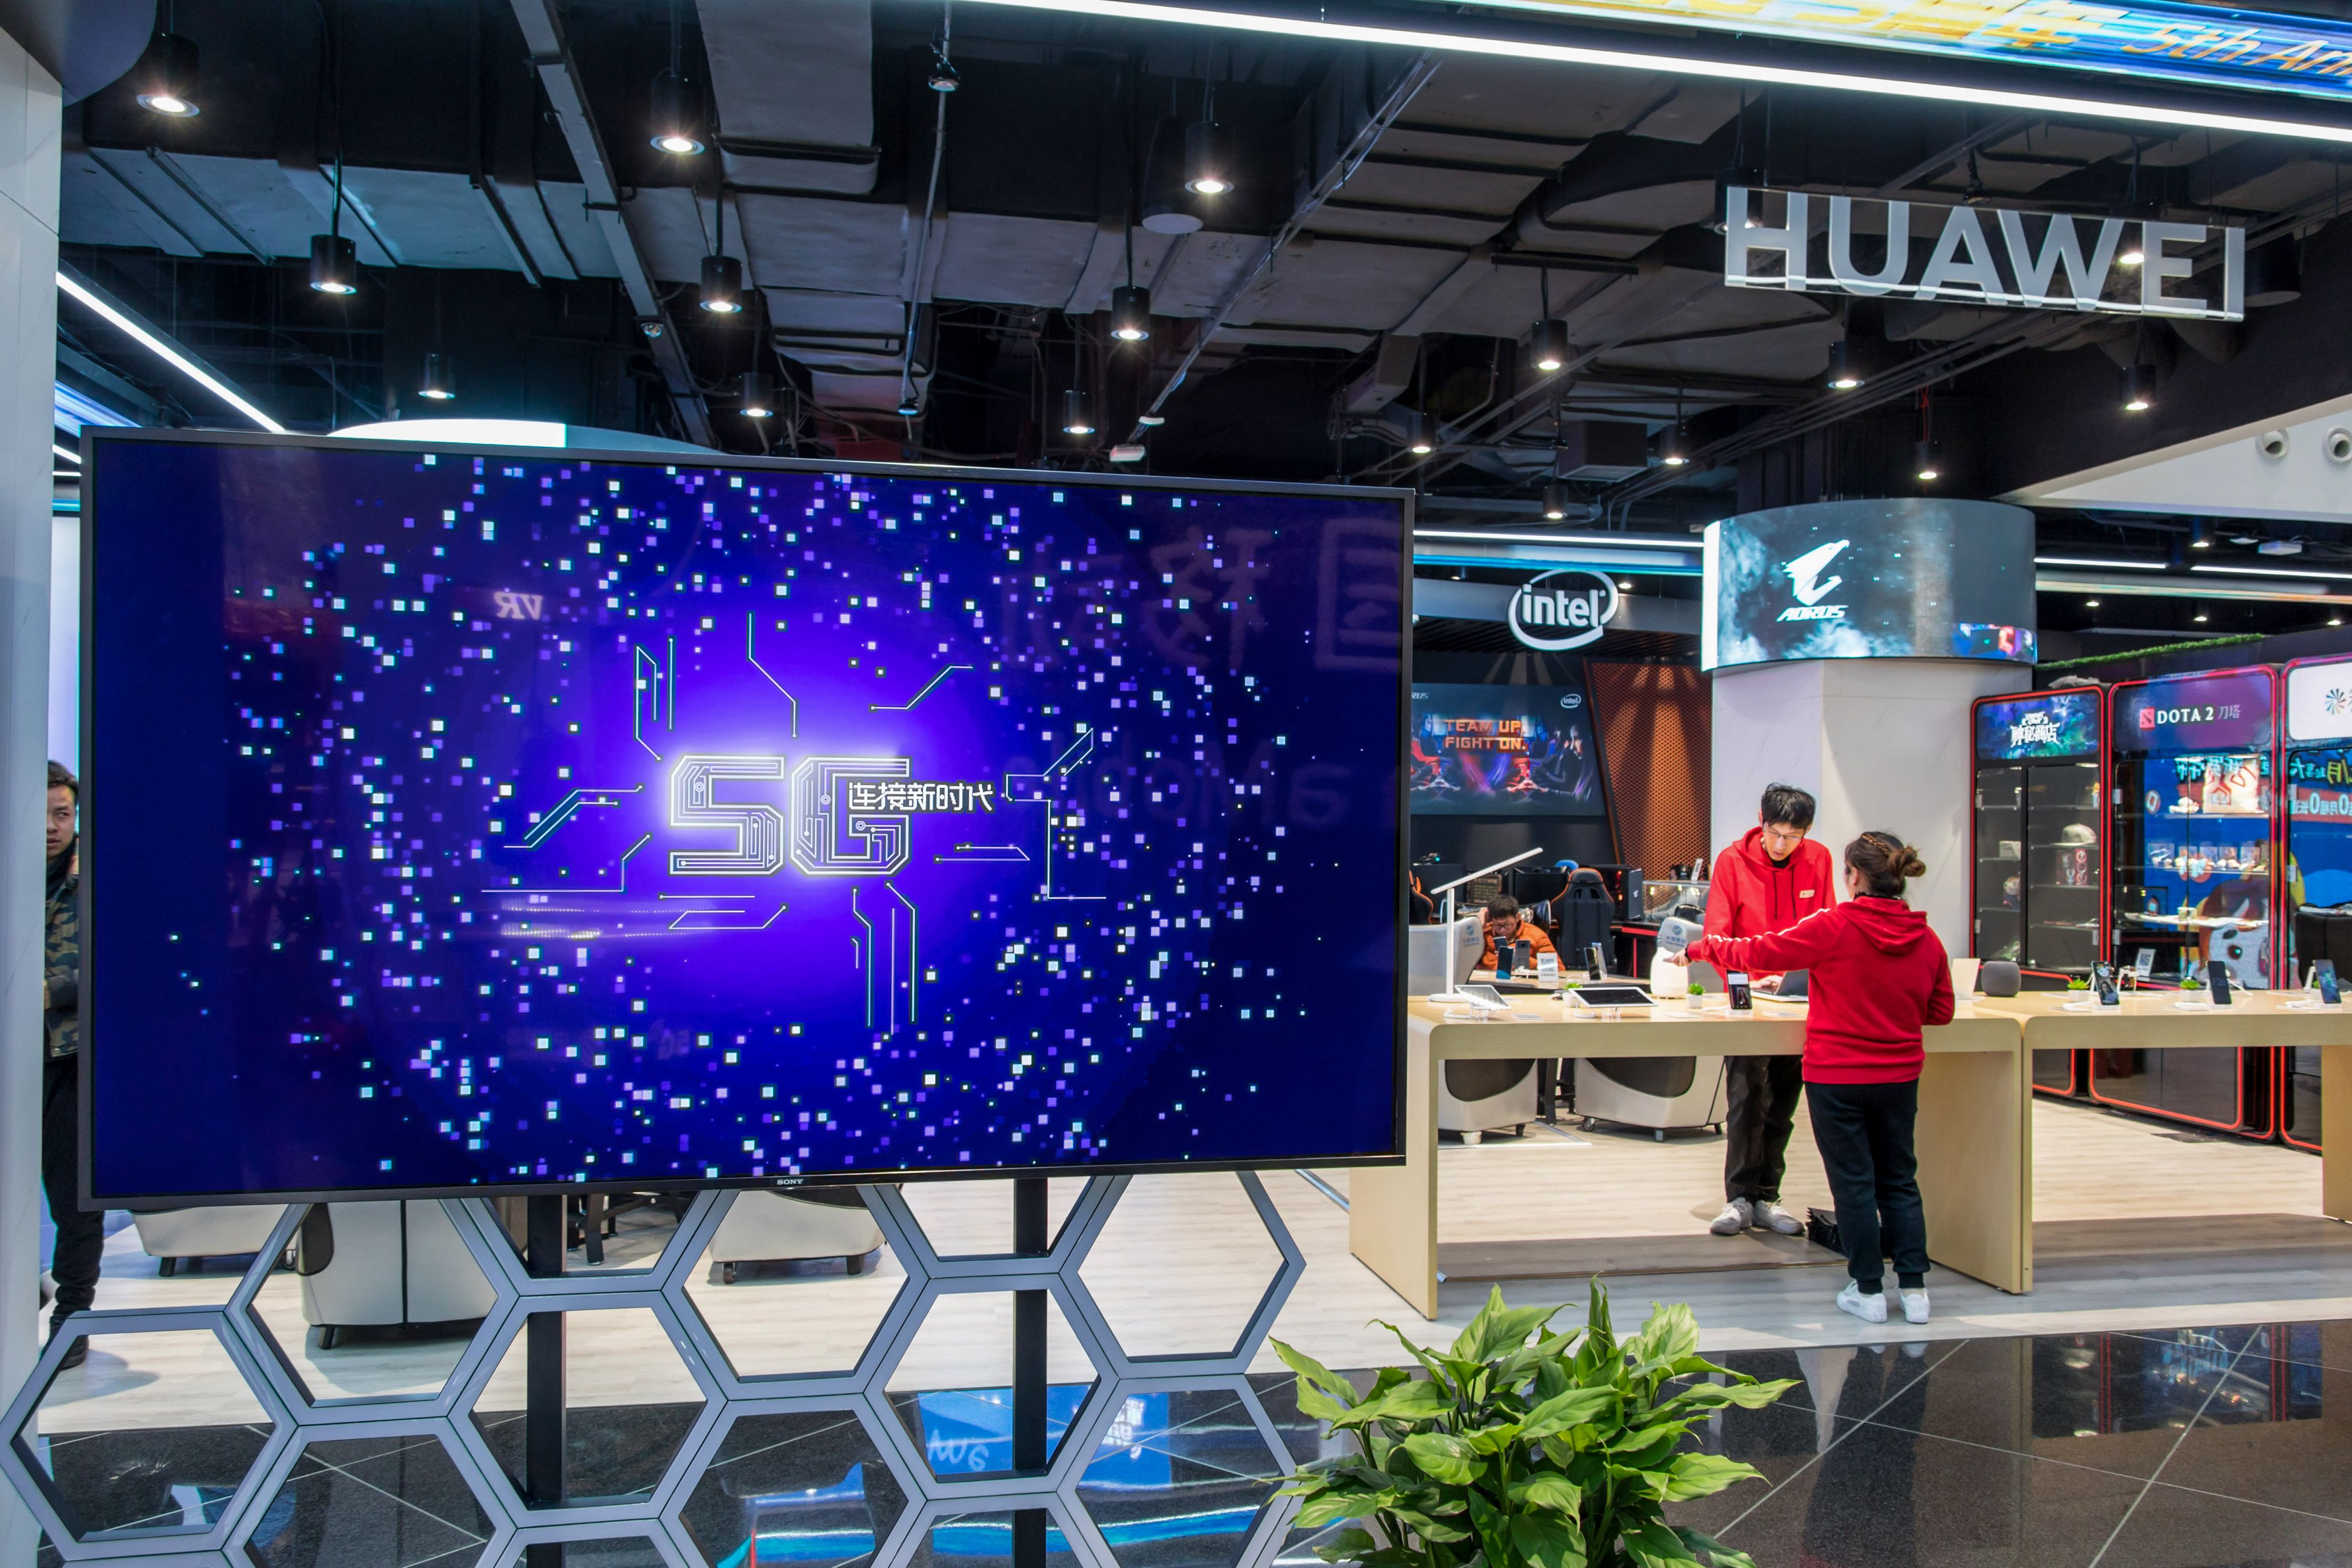 A Huawei booth at a China Mobile 5G experience center in Shanghai in Dec. 2018.